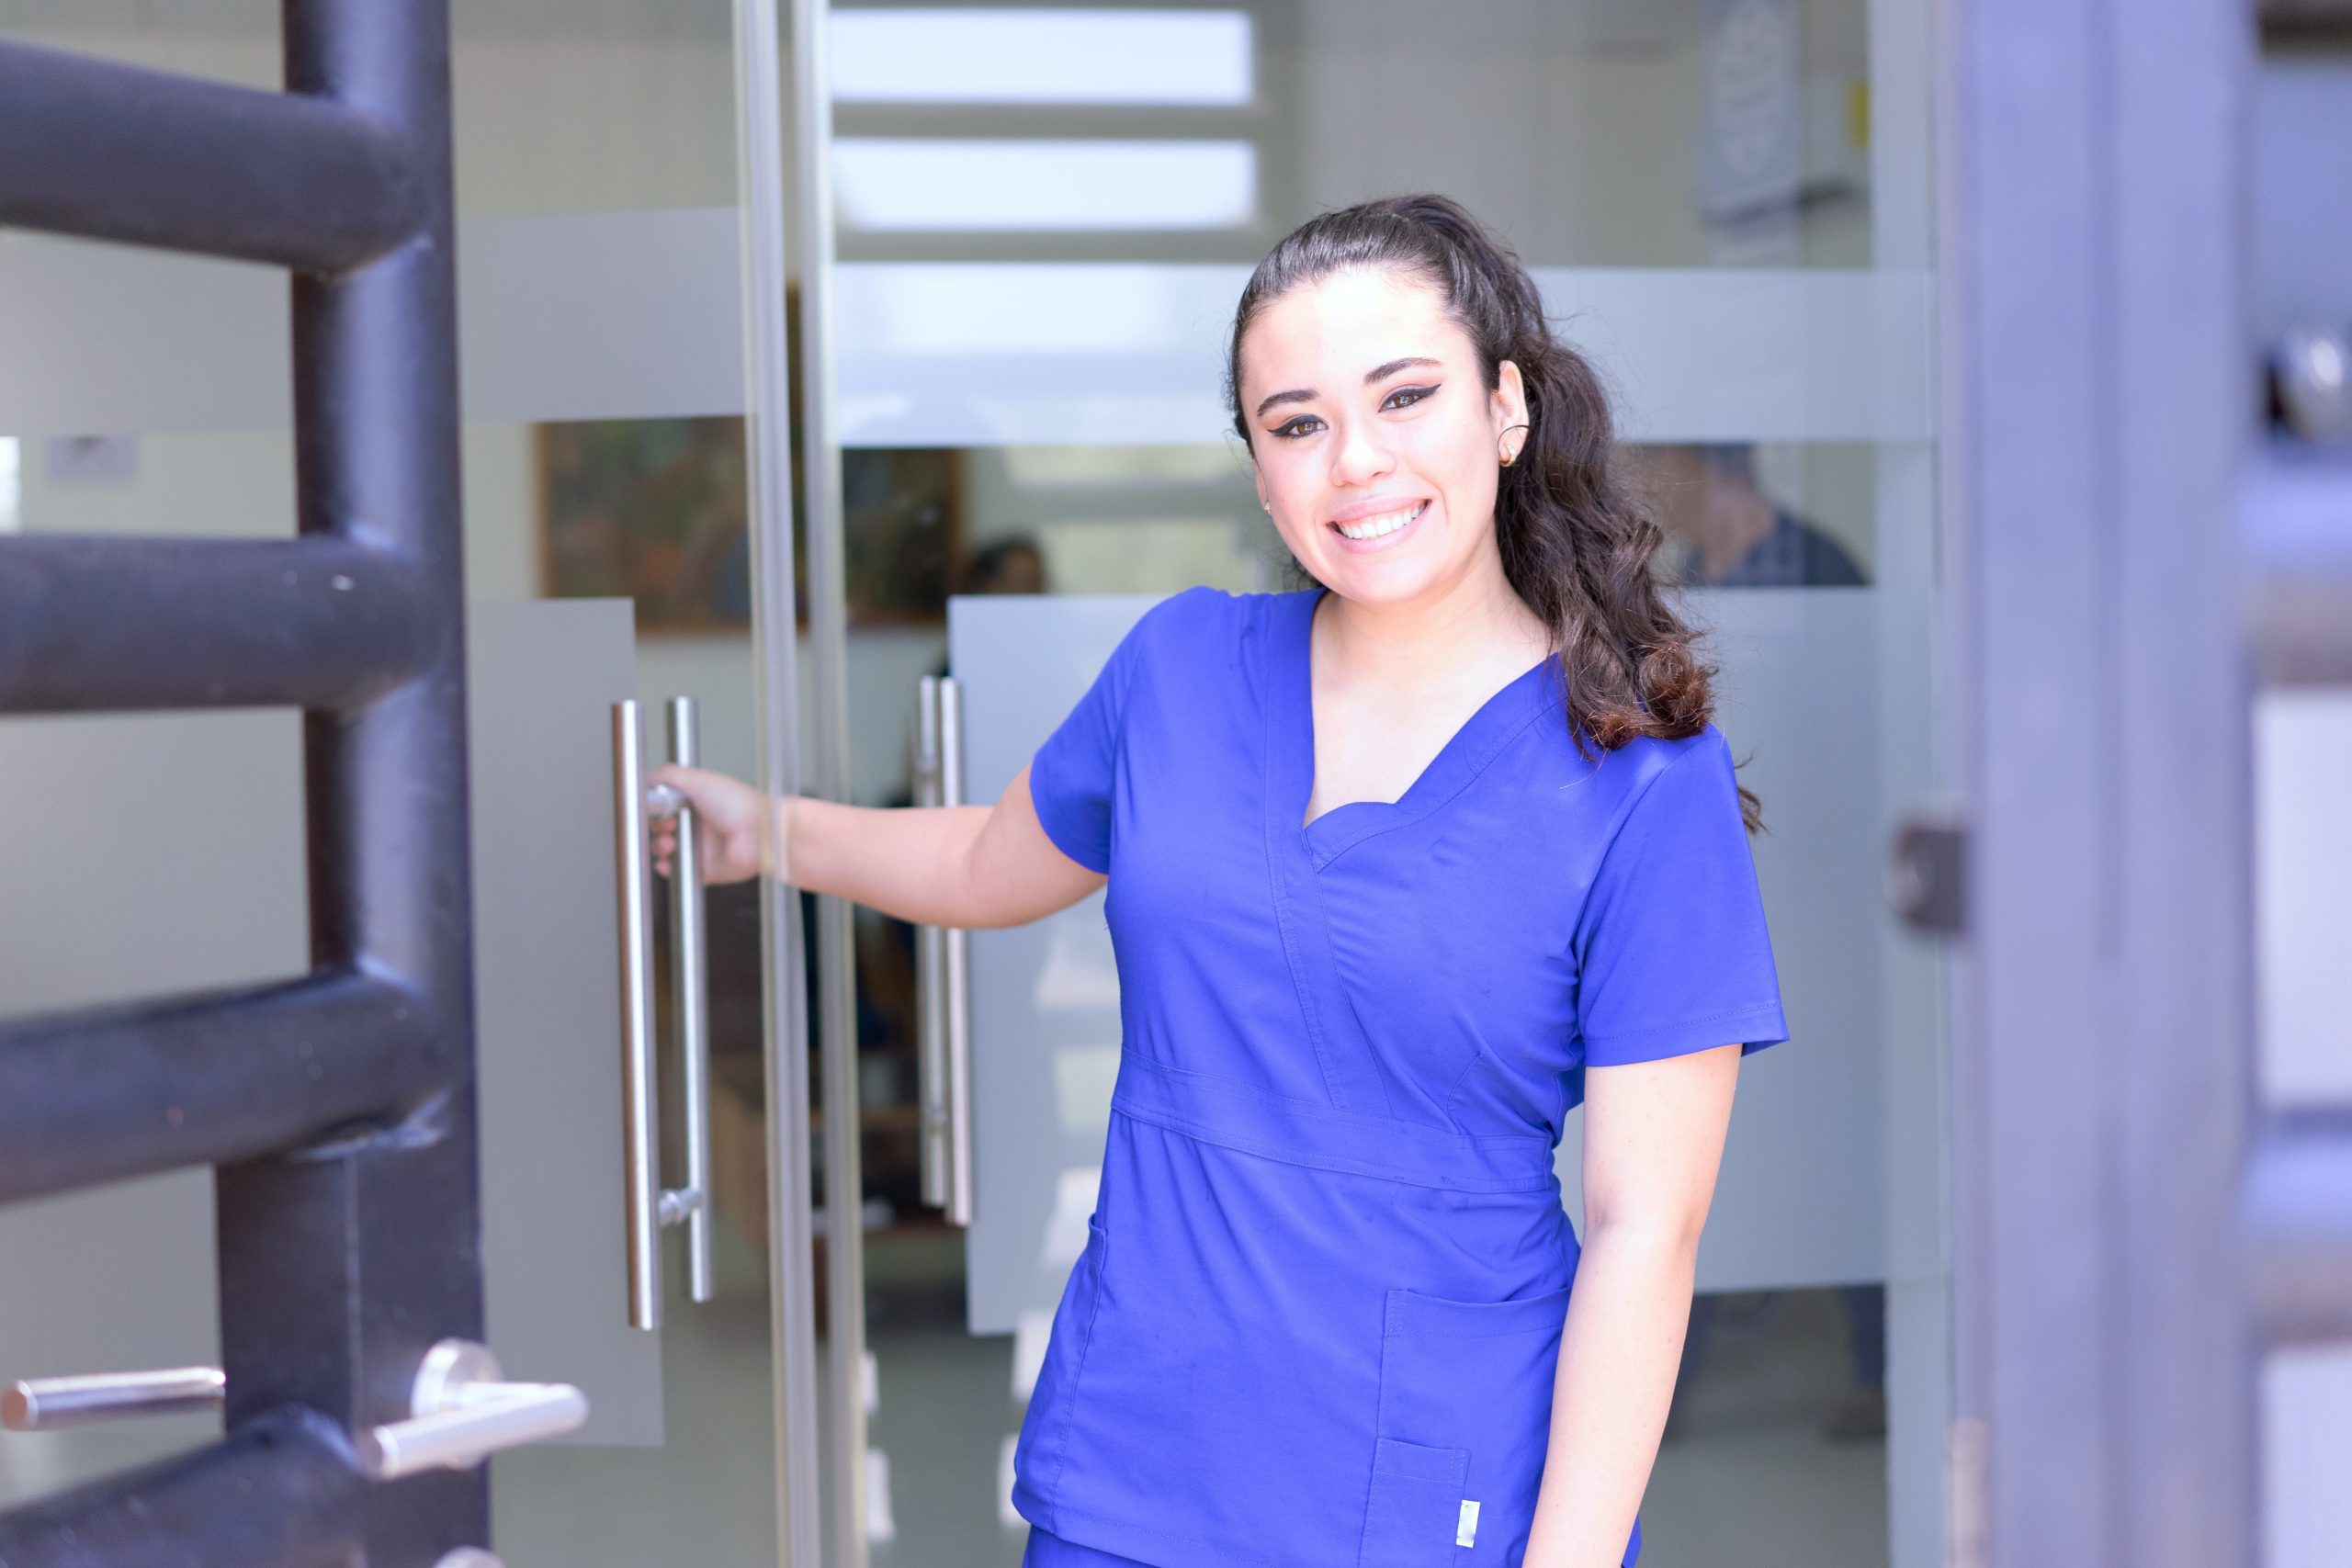 A nurse opening a door while finding a fulfilling career and high-paying job.